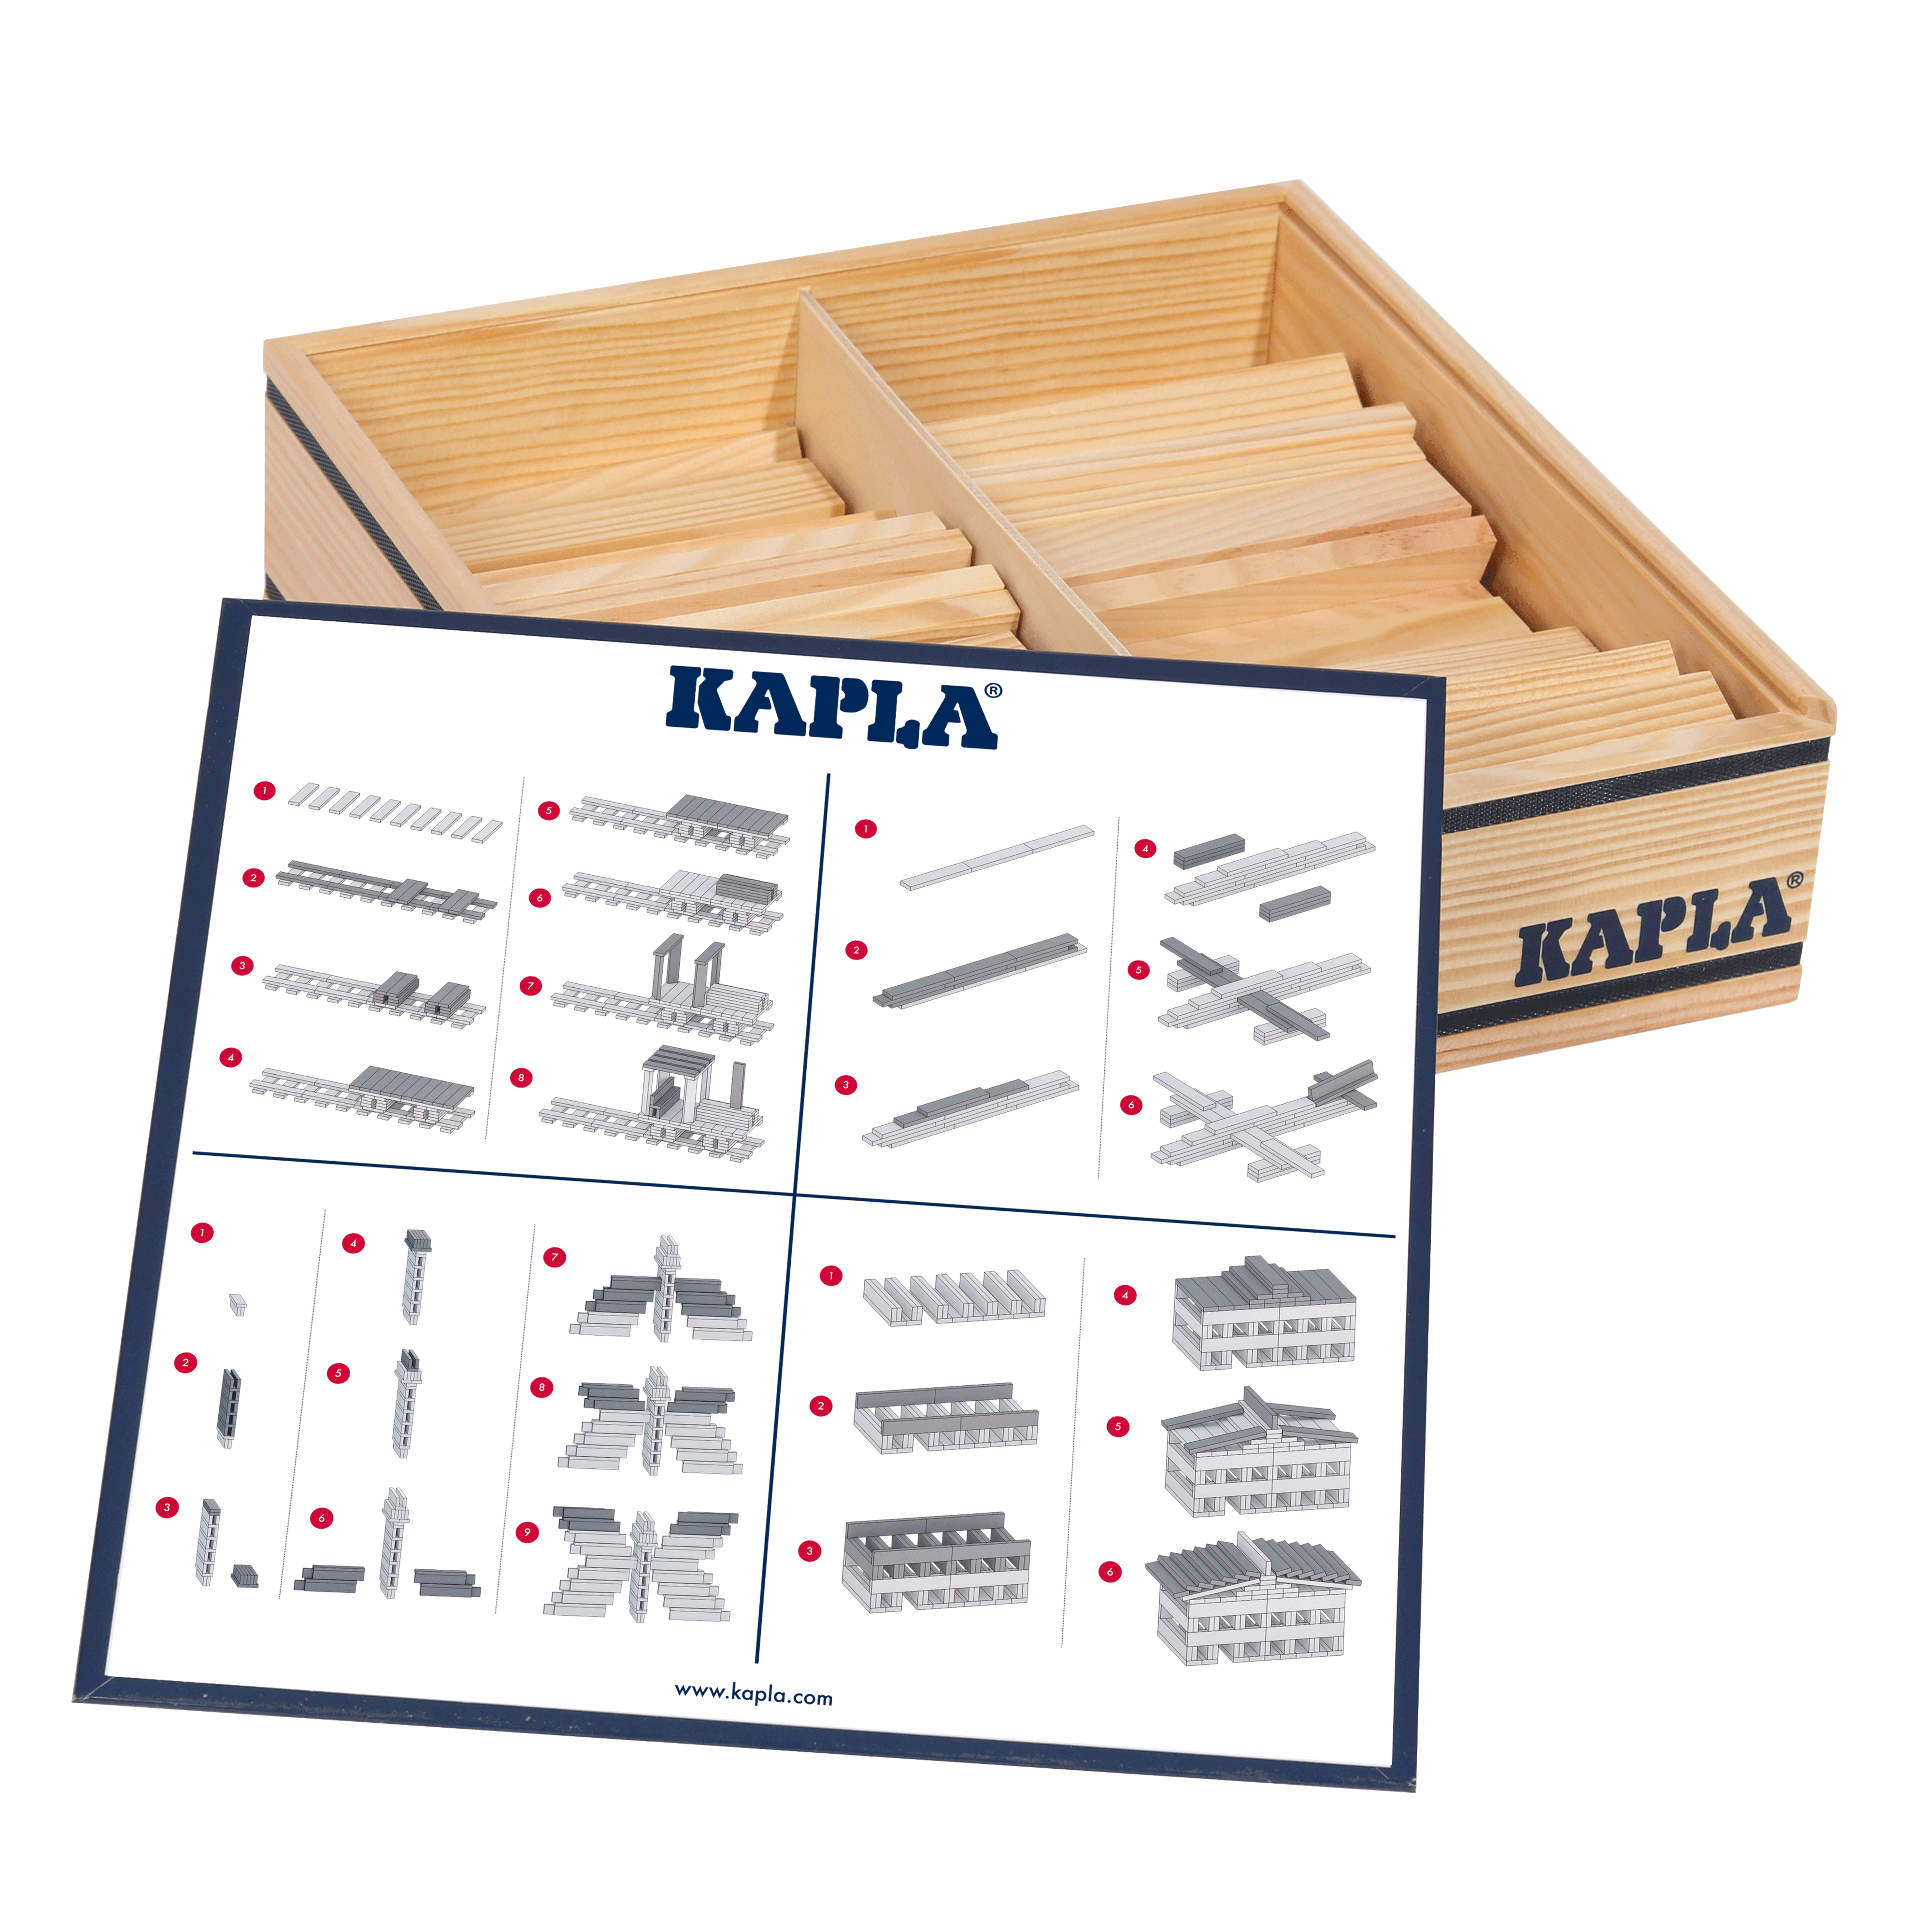 Open box showing kapla wooden planks.